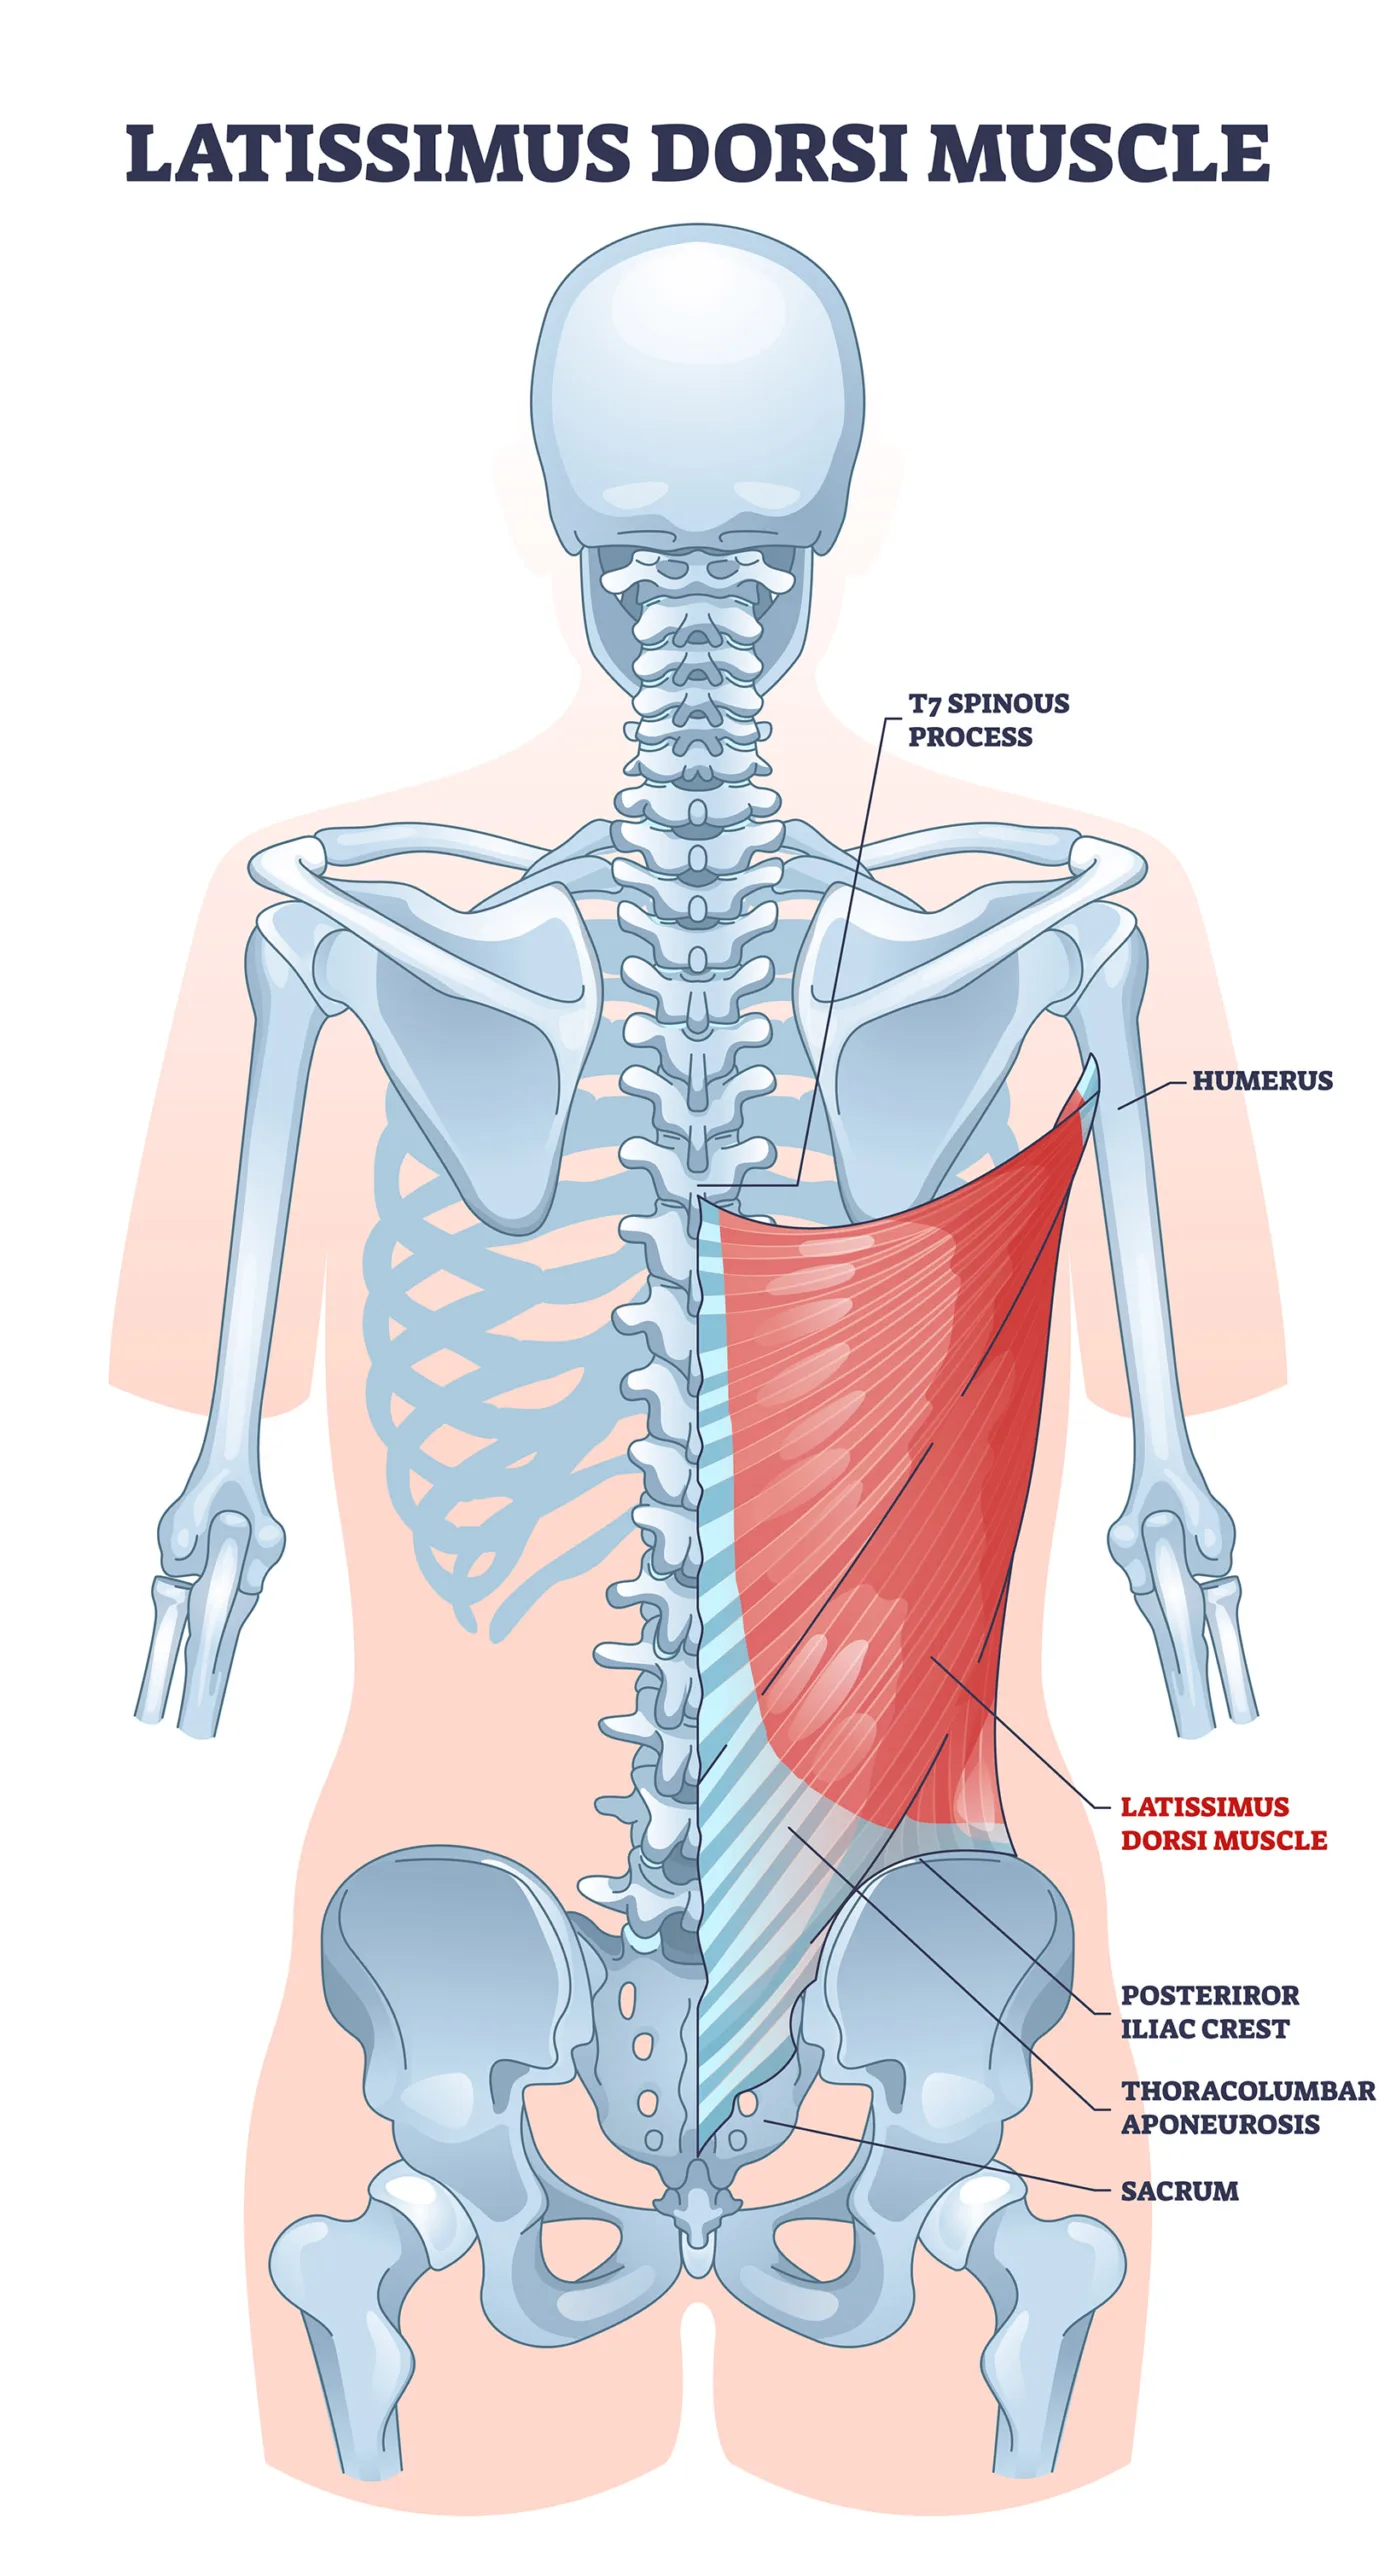 Latissimus dorsi as body side muscle behind human ribcage outline diagram. Labeled educational medical scheme with spinous process, iliac crest or thoracolumbar aponeurosis anatomy vector illustration